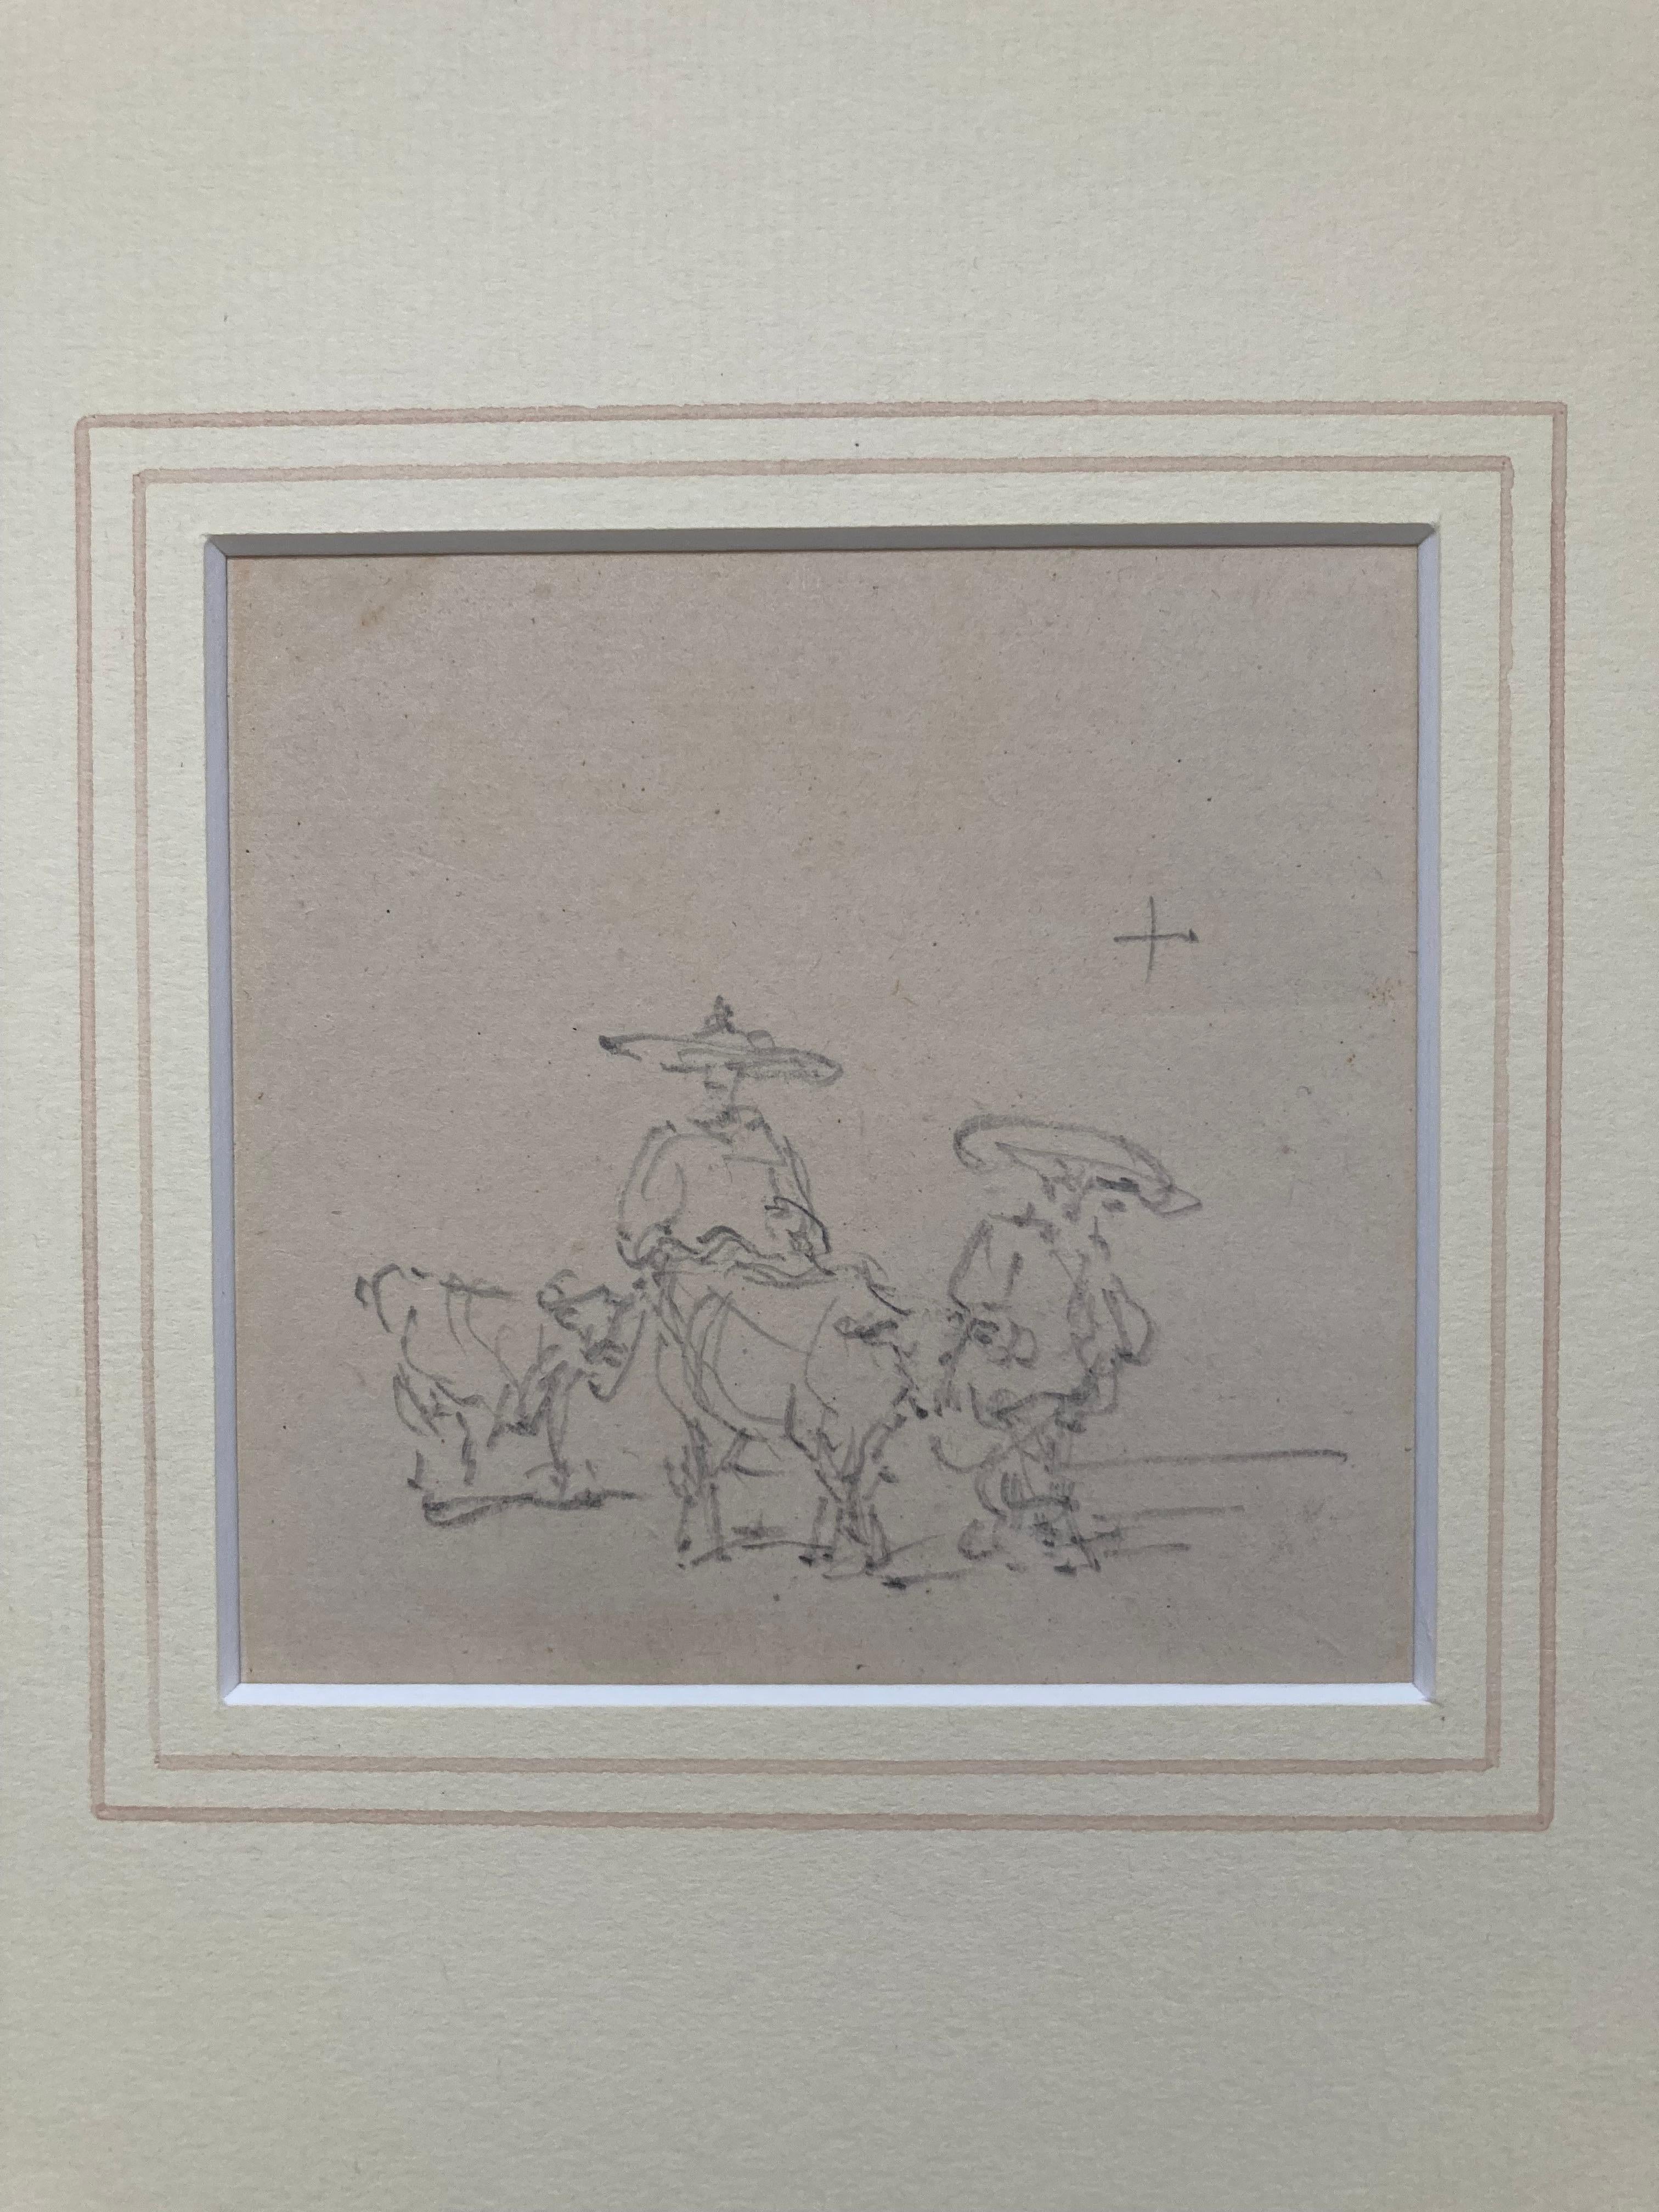 Early English topograpical watercolor of Chinese figures - Art by George Chinnery